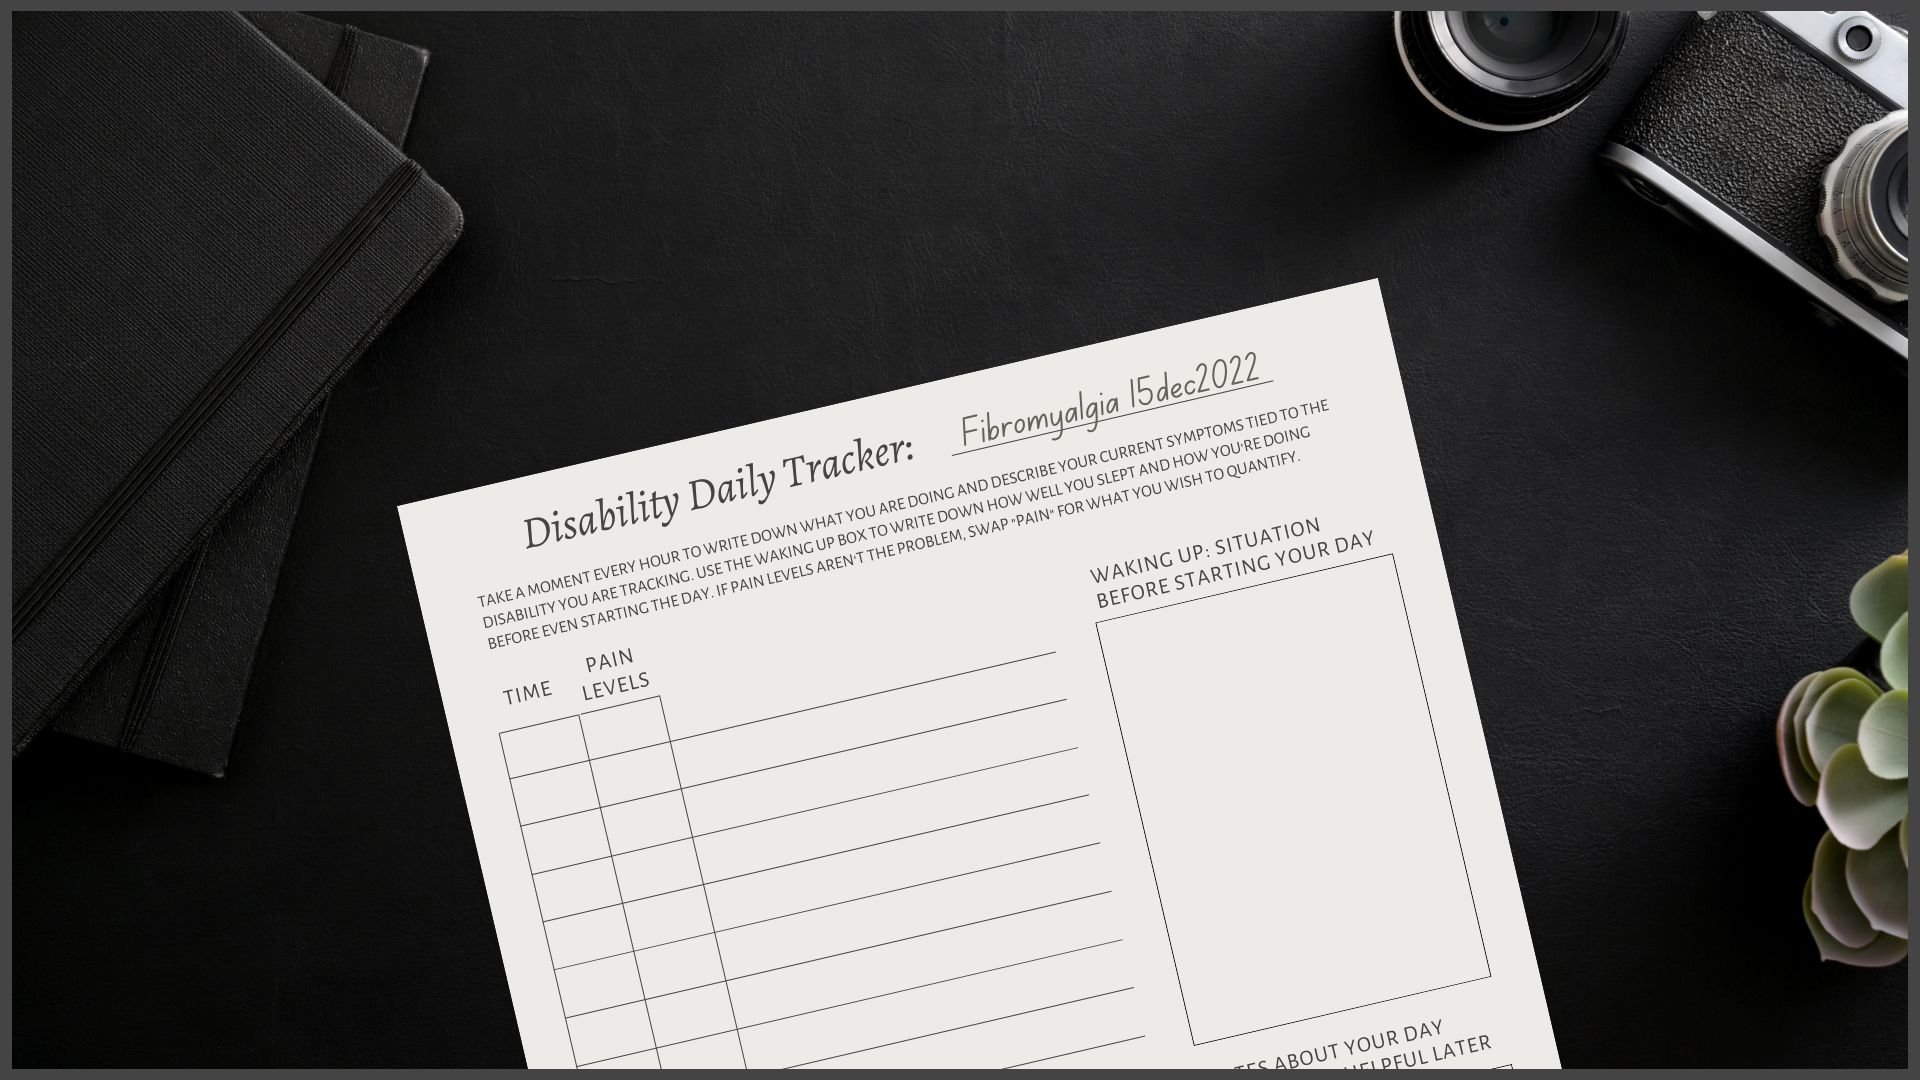 Disability tracker. written on top: Fibromyalgia and the date. the sheet is lined with a space to write the time as well as pain levels hourly.